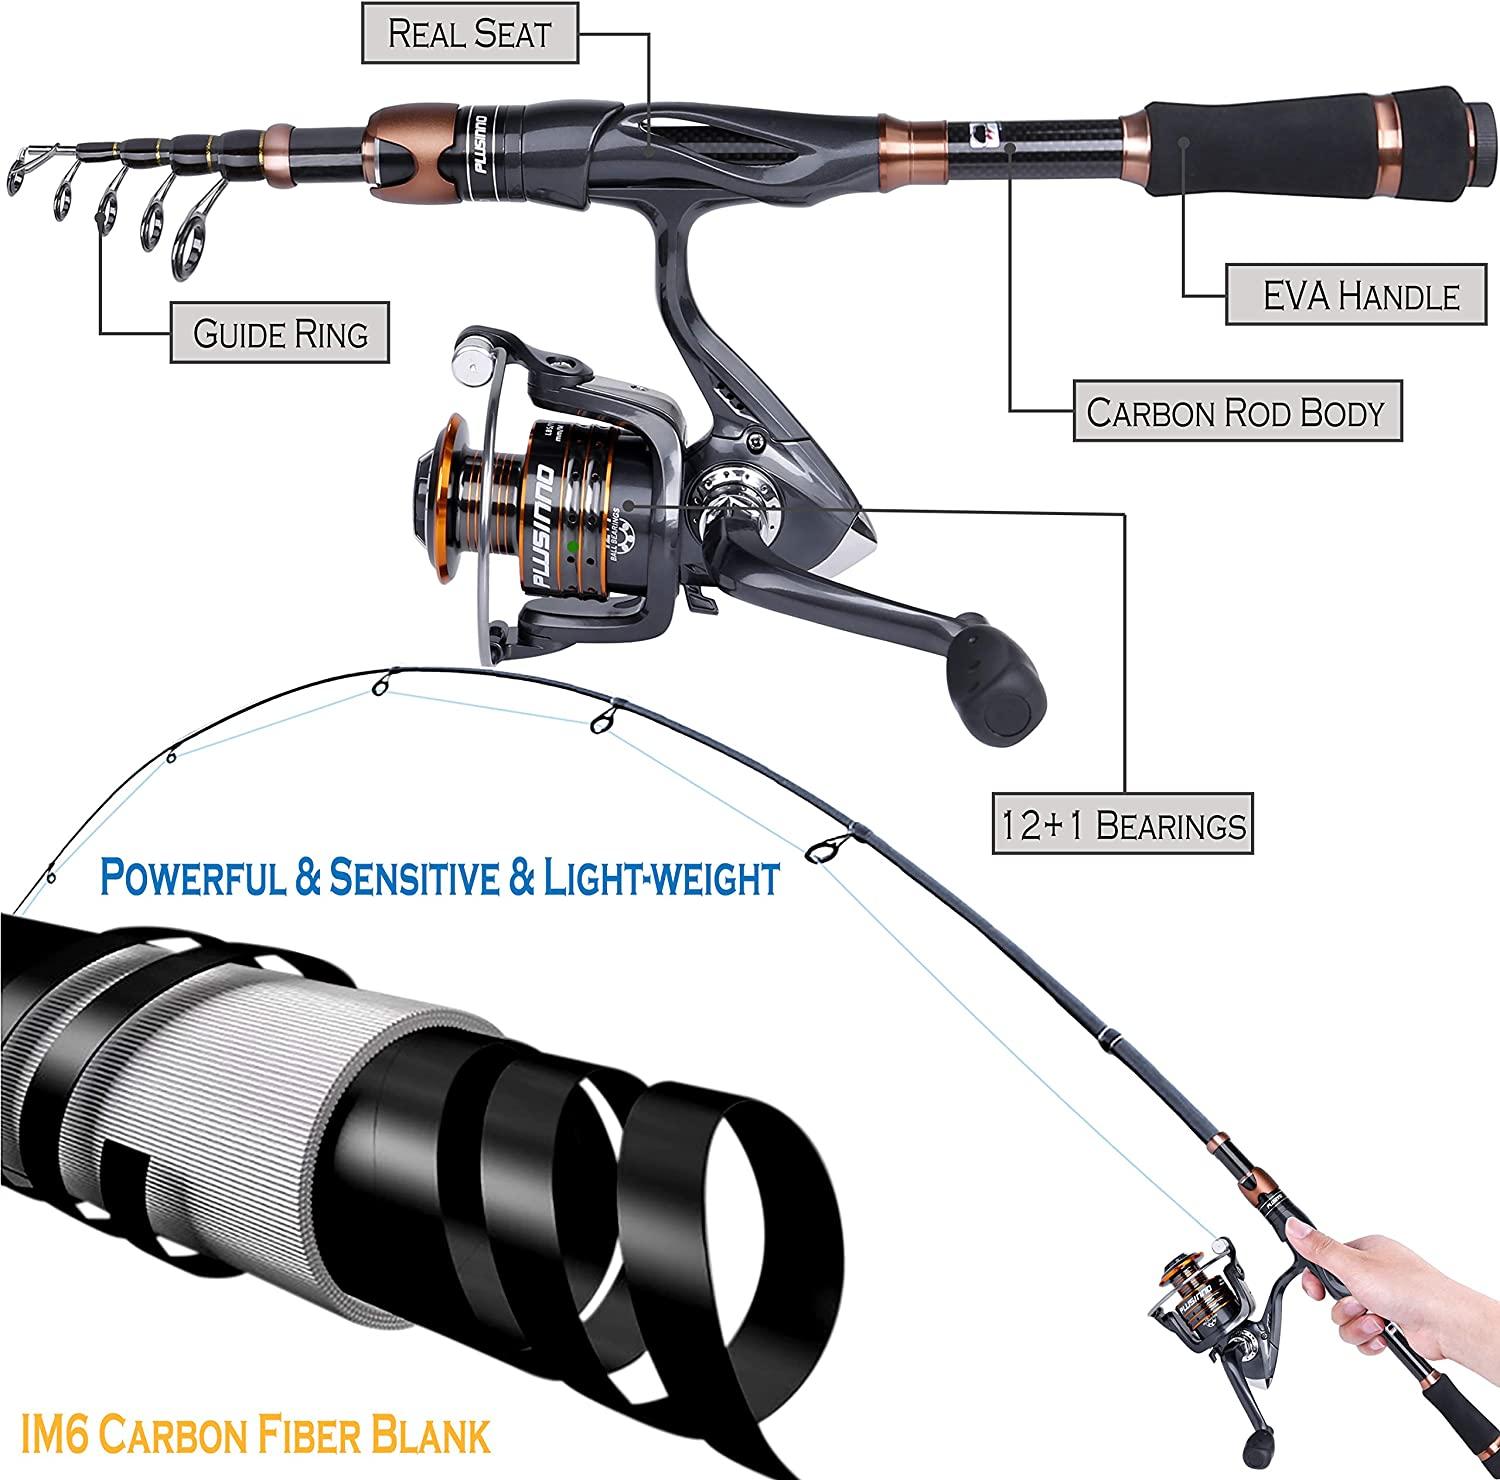 PLUSINNO Fishing Rod and Reel Combos, Bronze Warrior Toray 24-Ton Carbon Matrix Telescopic Fishing Rod Pole, 12 +1 Shielded Stainless Steel BB Spinning Reel, Fishing Gear Fishing rod+reel(No Lure